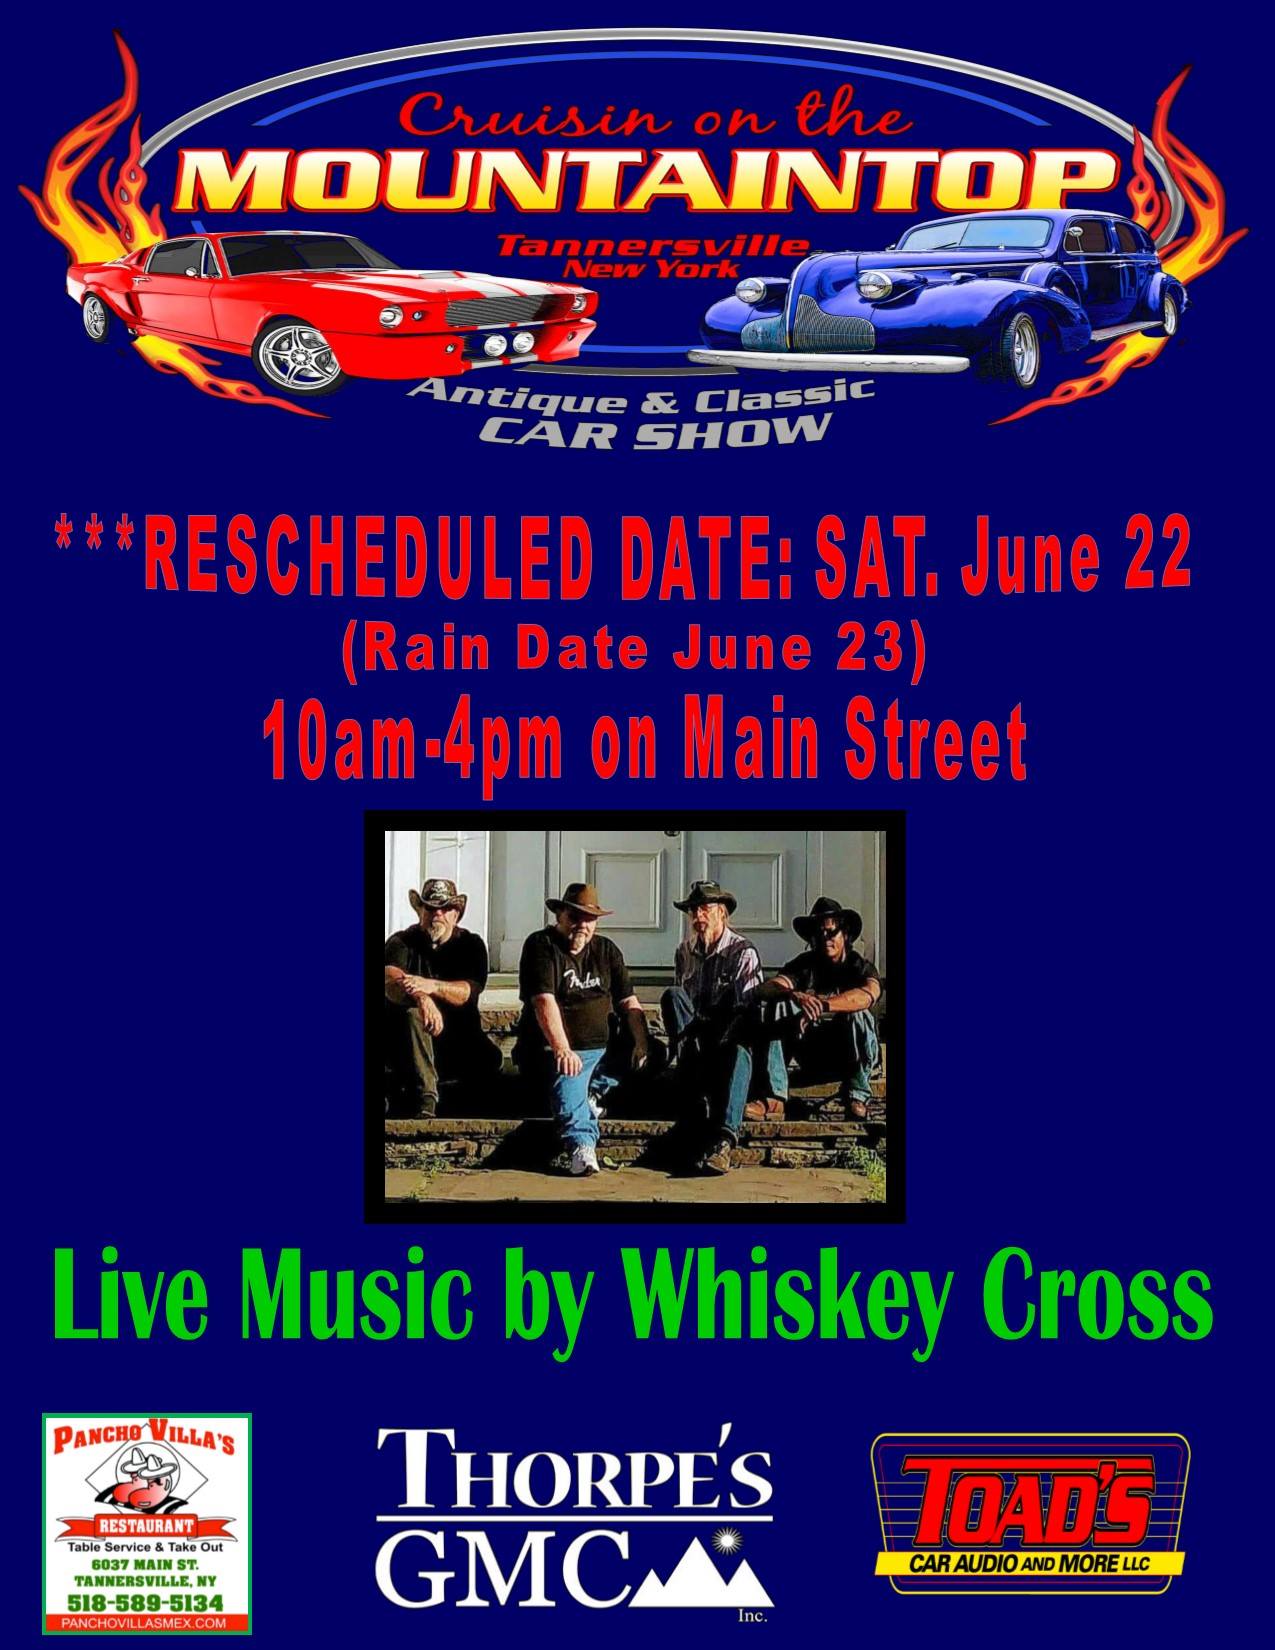 Tannersville Cruisin' On the Mountaintop Father's Day Car Show 2019